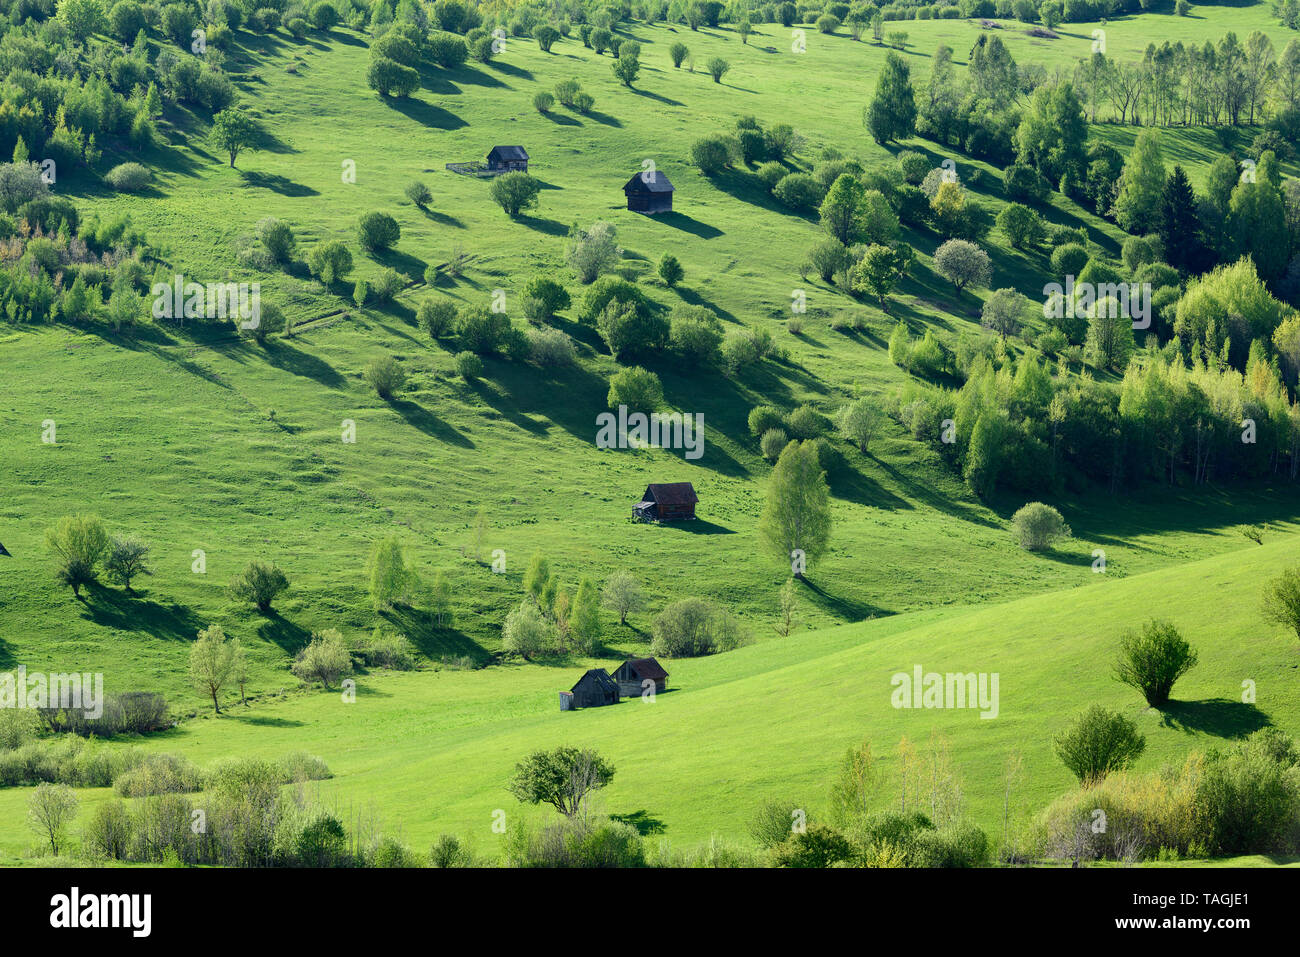 Idyllic green meadows, whit small houses and hay barns. Spring sunny grassy field.  Idyllic green valleys in mountain area. Stock Photo